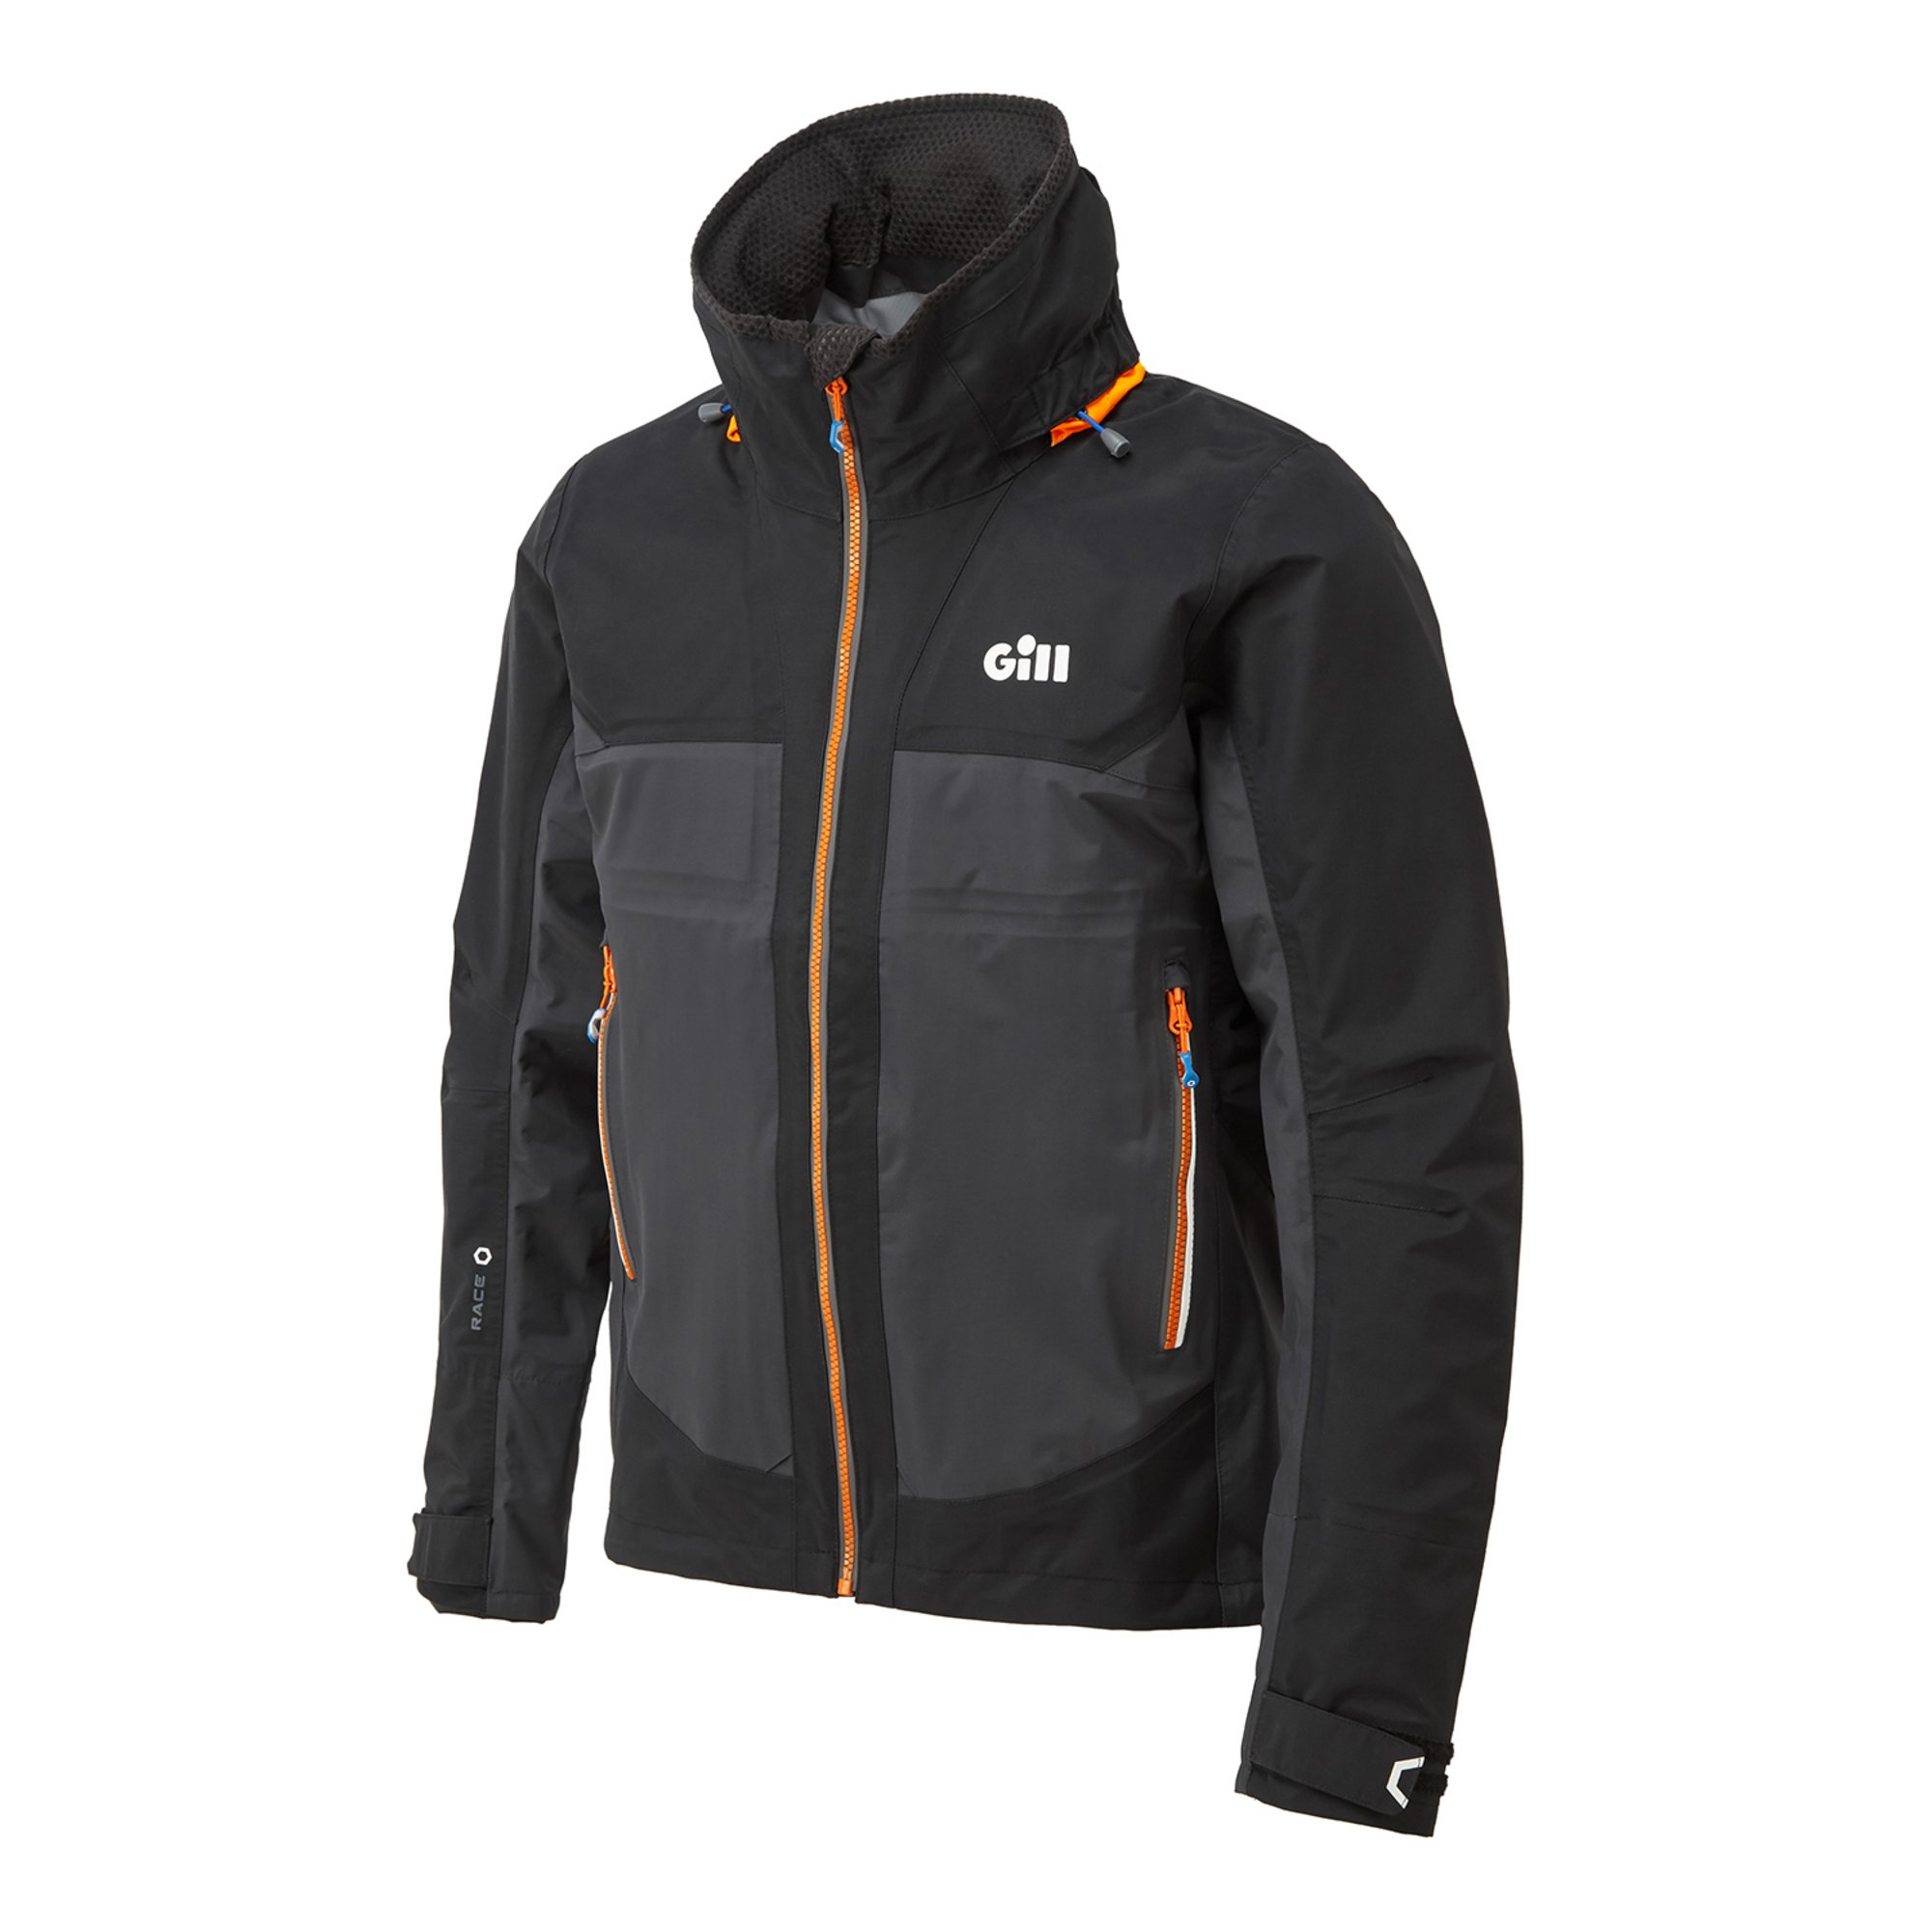 RS23 - Race Fusion Jacket: Performance driven design for use in ...